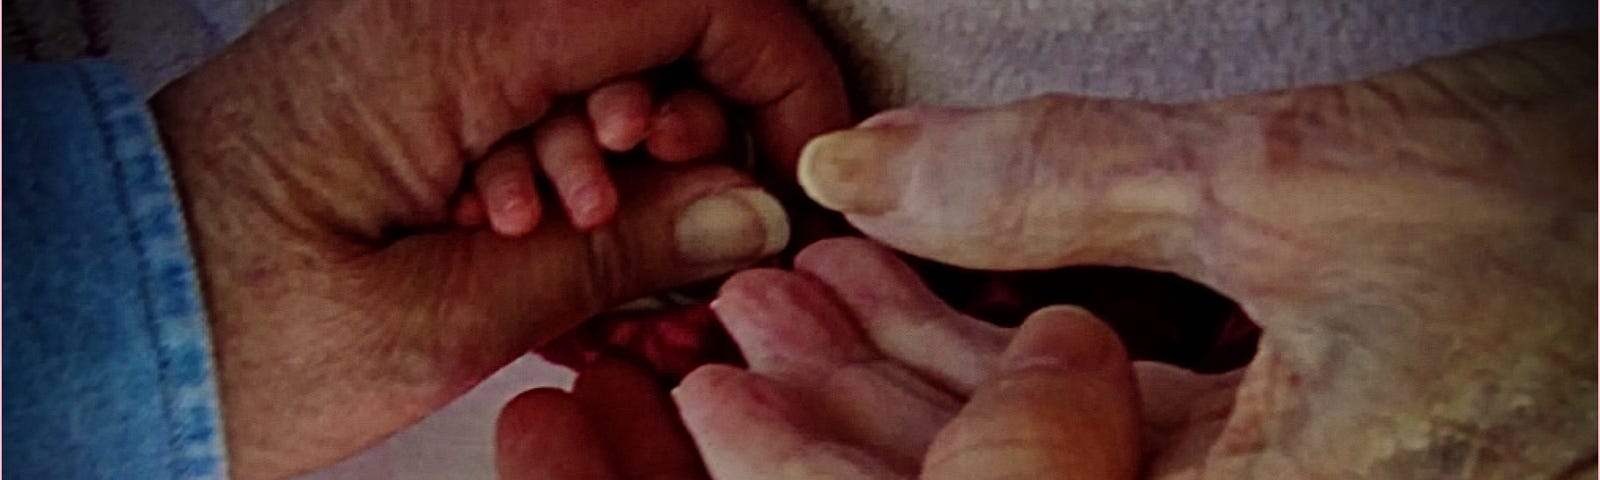 Four generations of hands holding Great Grandma, Grandma, Mom, and baby daughter.